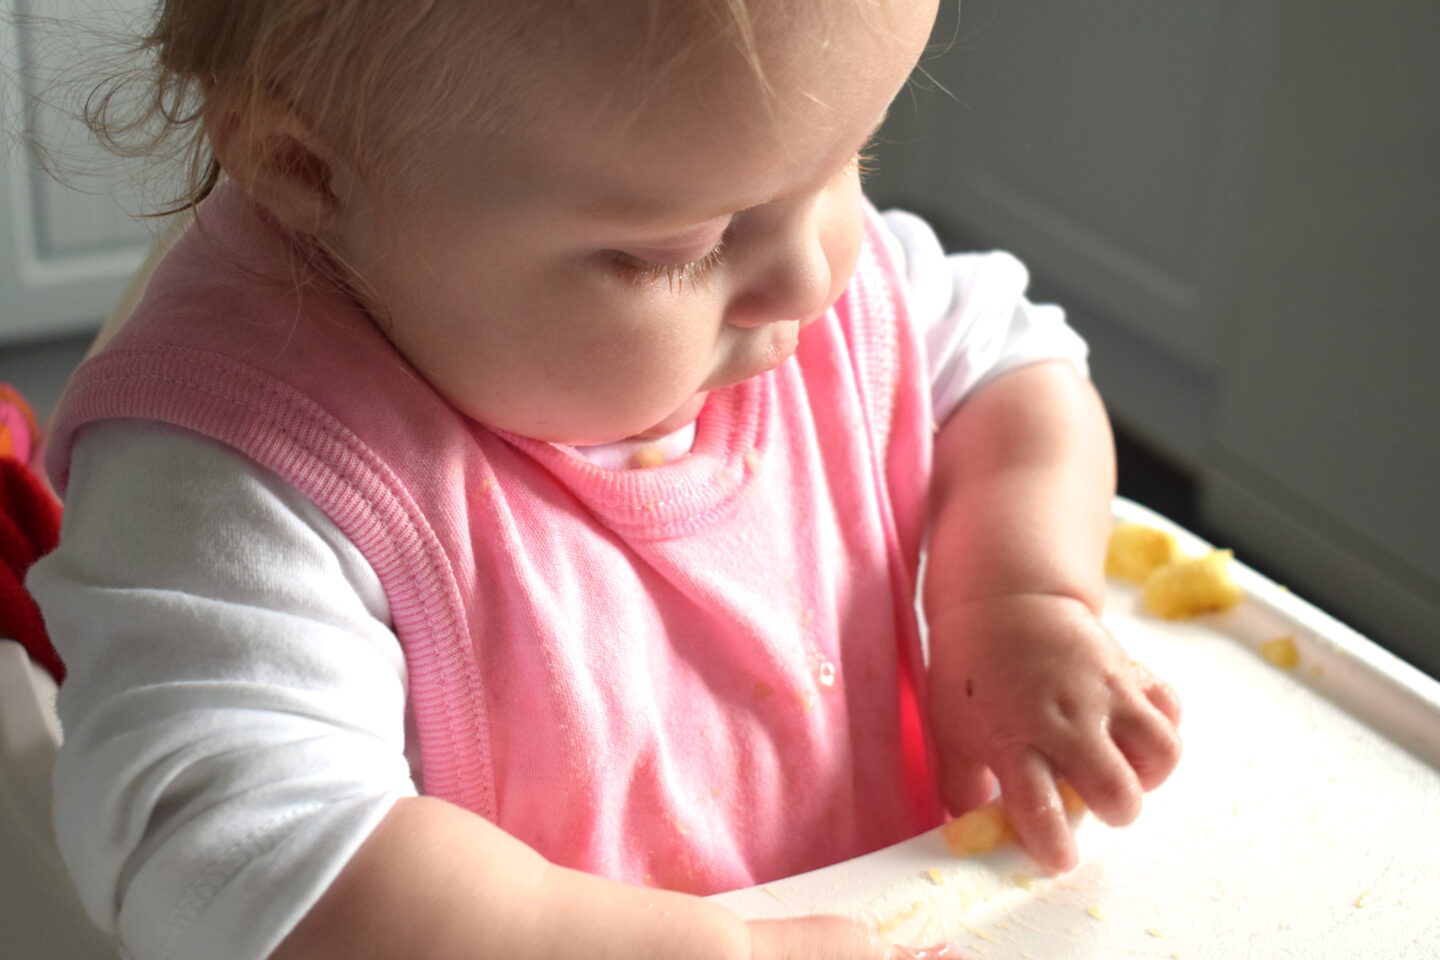 Our baby’s Cow’s Milk Protein Allergy (CMPA) journey